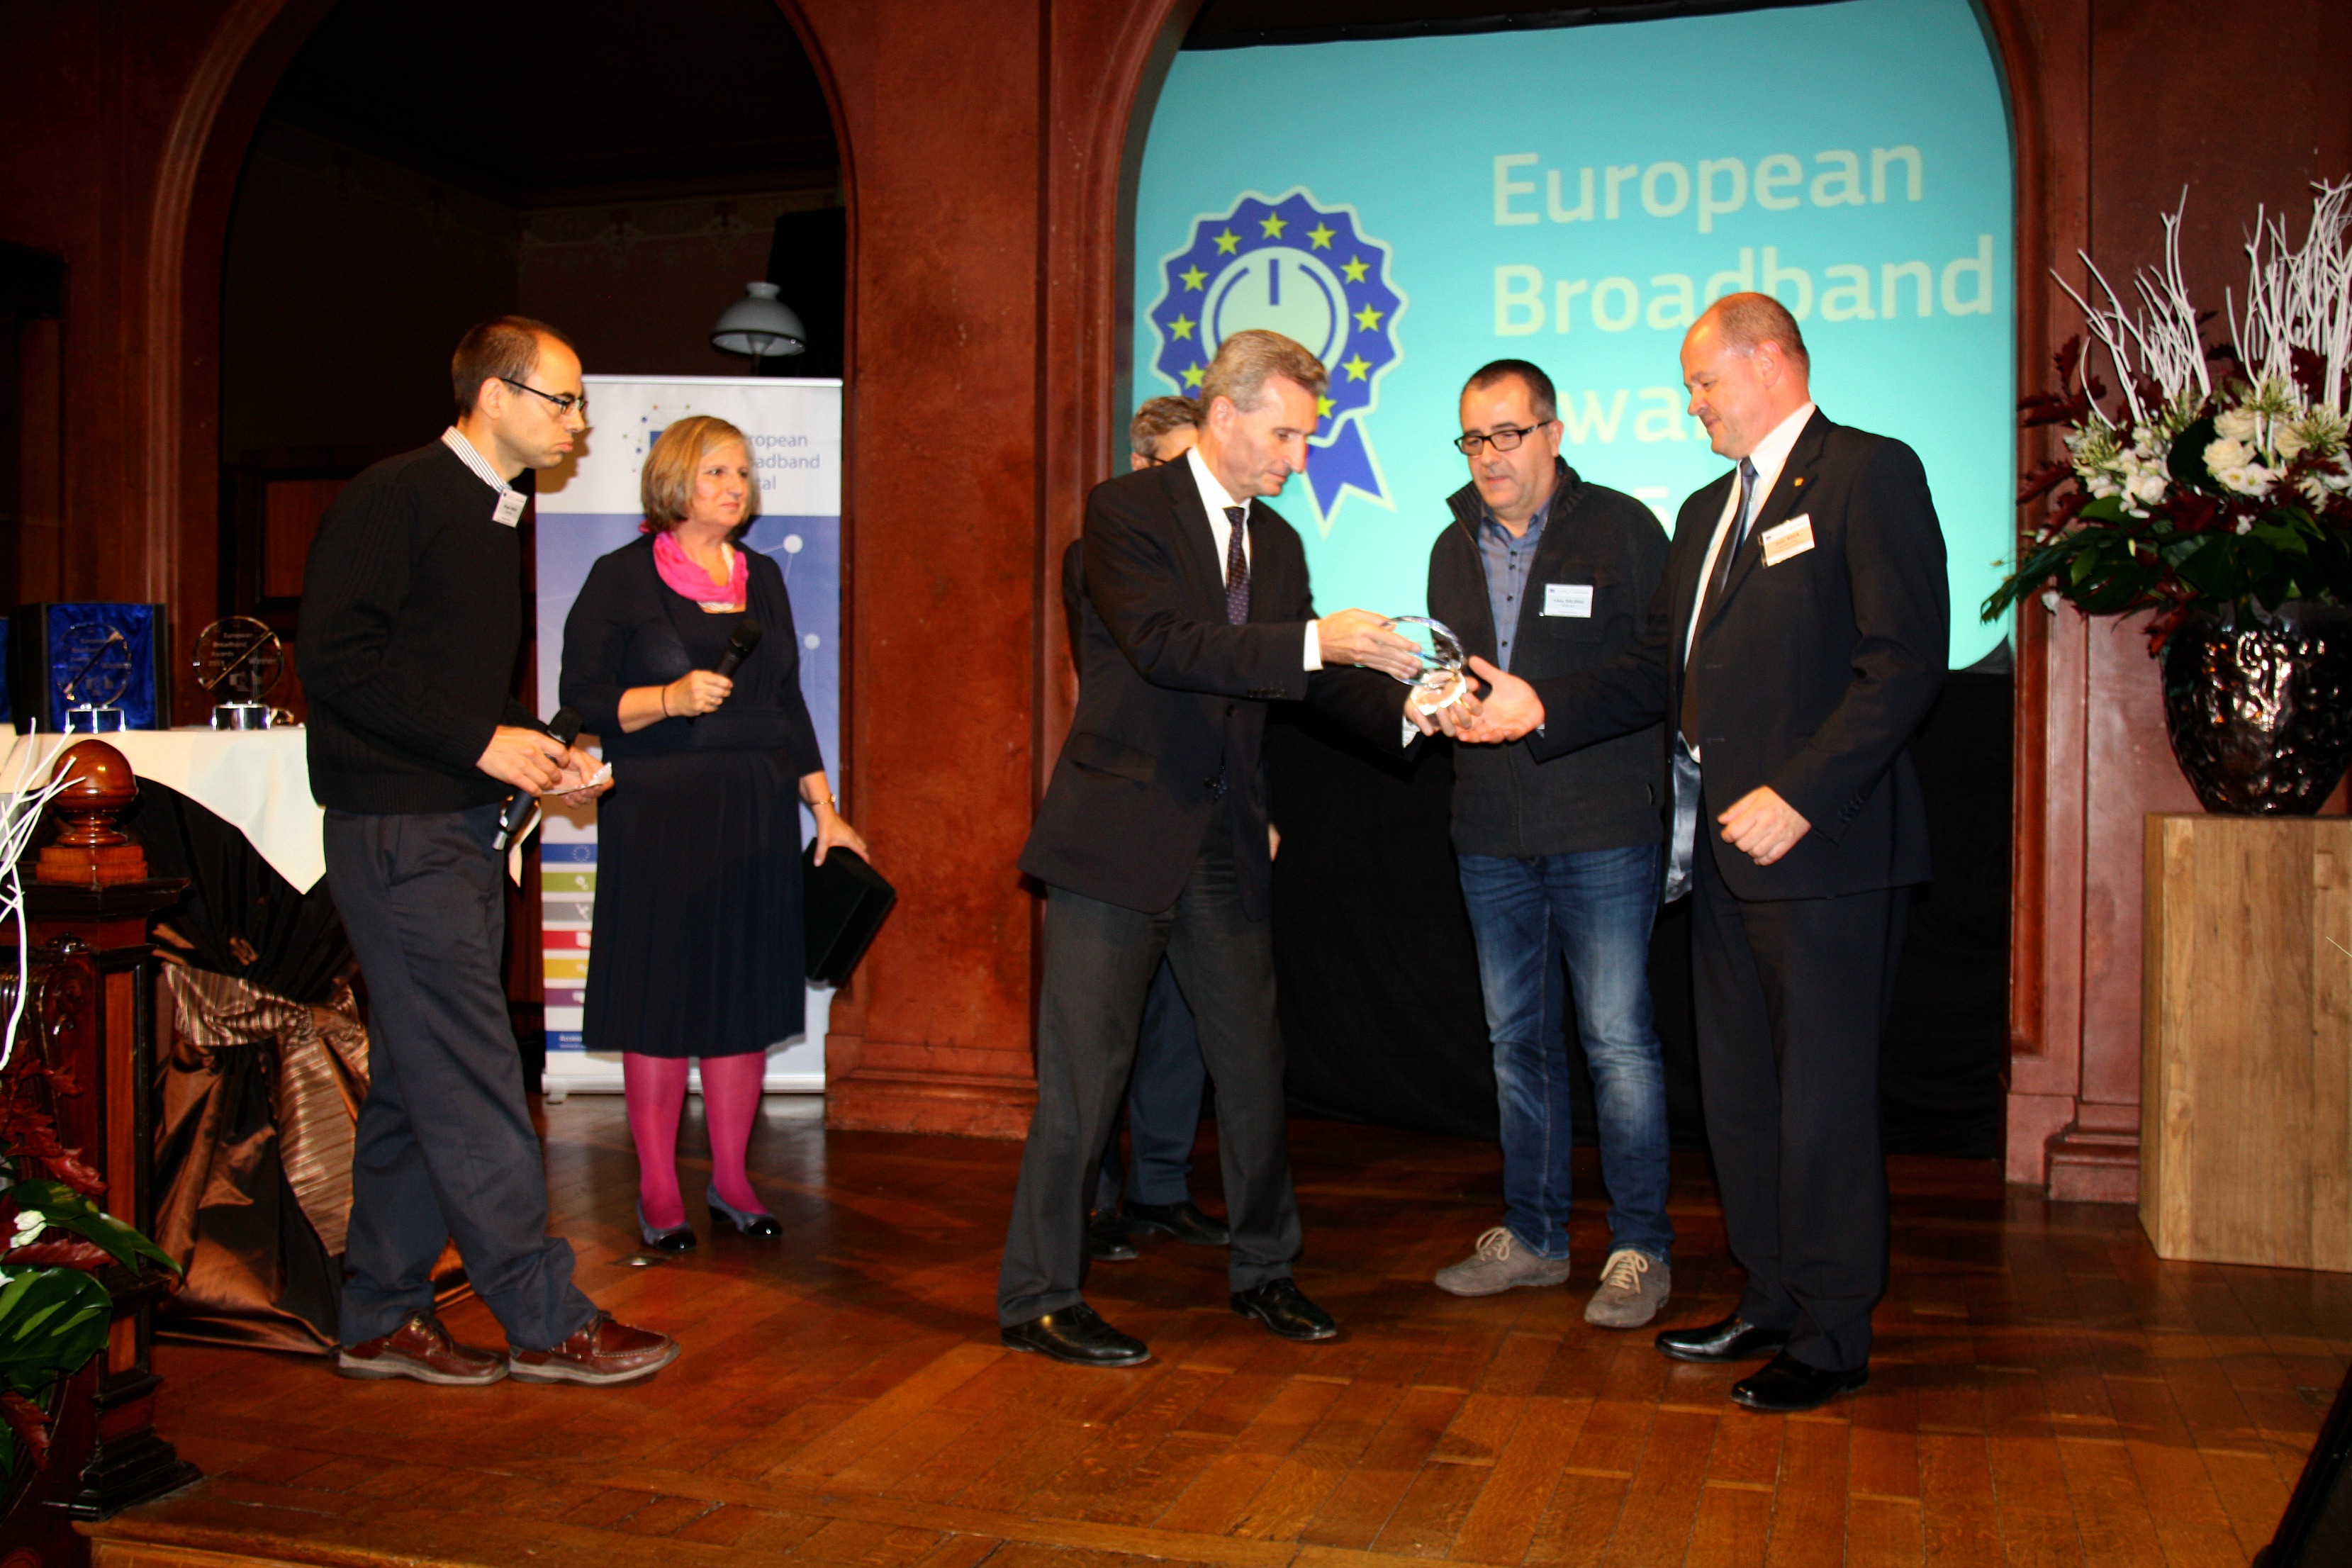 European Commissioner responsible for the Digital Economy and Society, Günther H. Oettinger handing the European Boardband Award to Guifi.net representatives (by ACN)